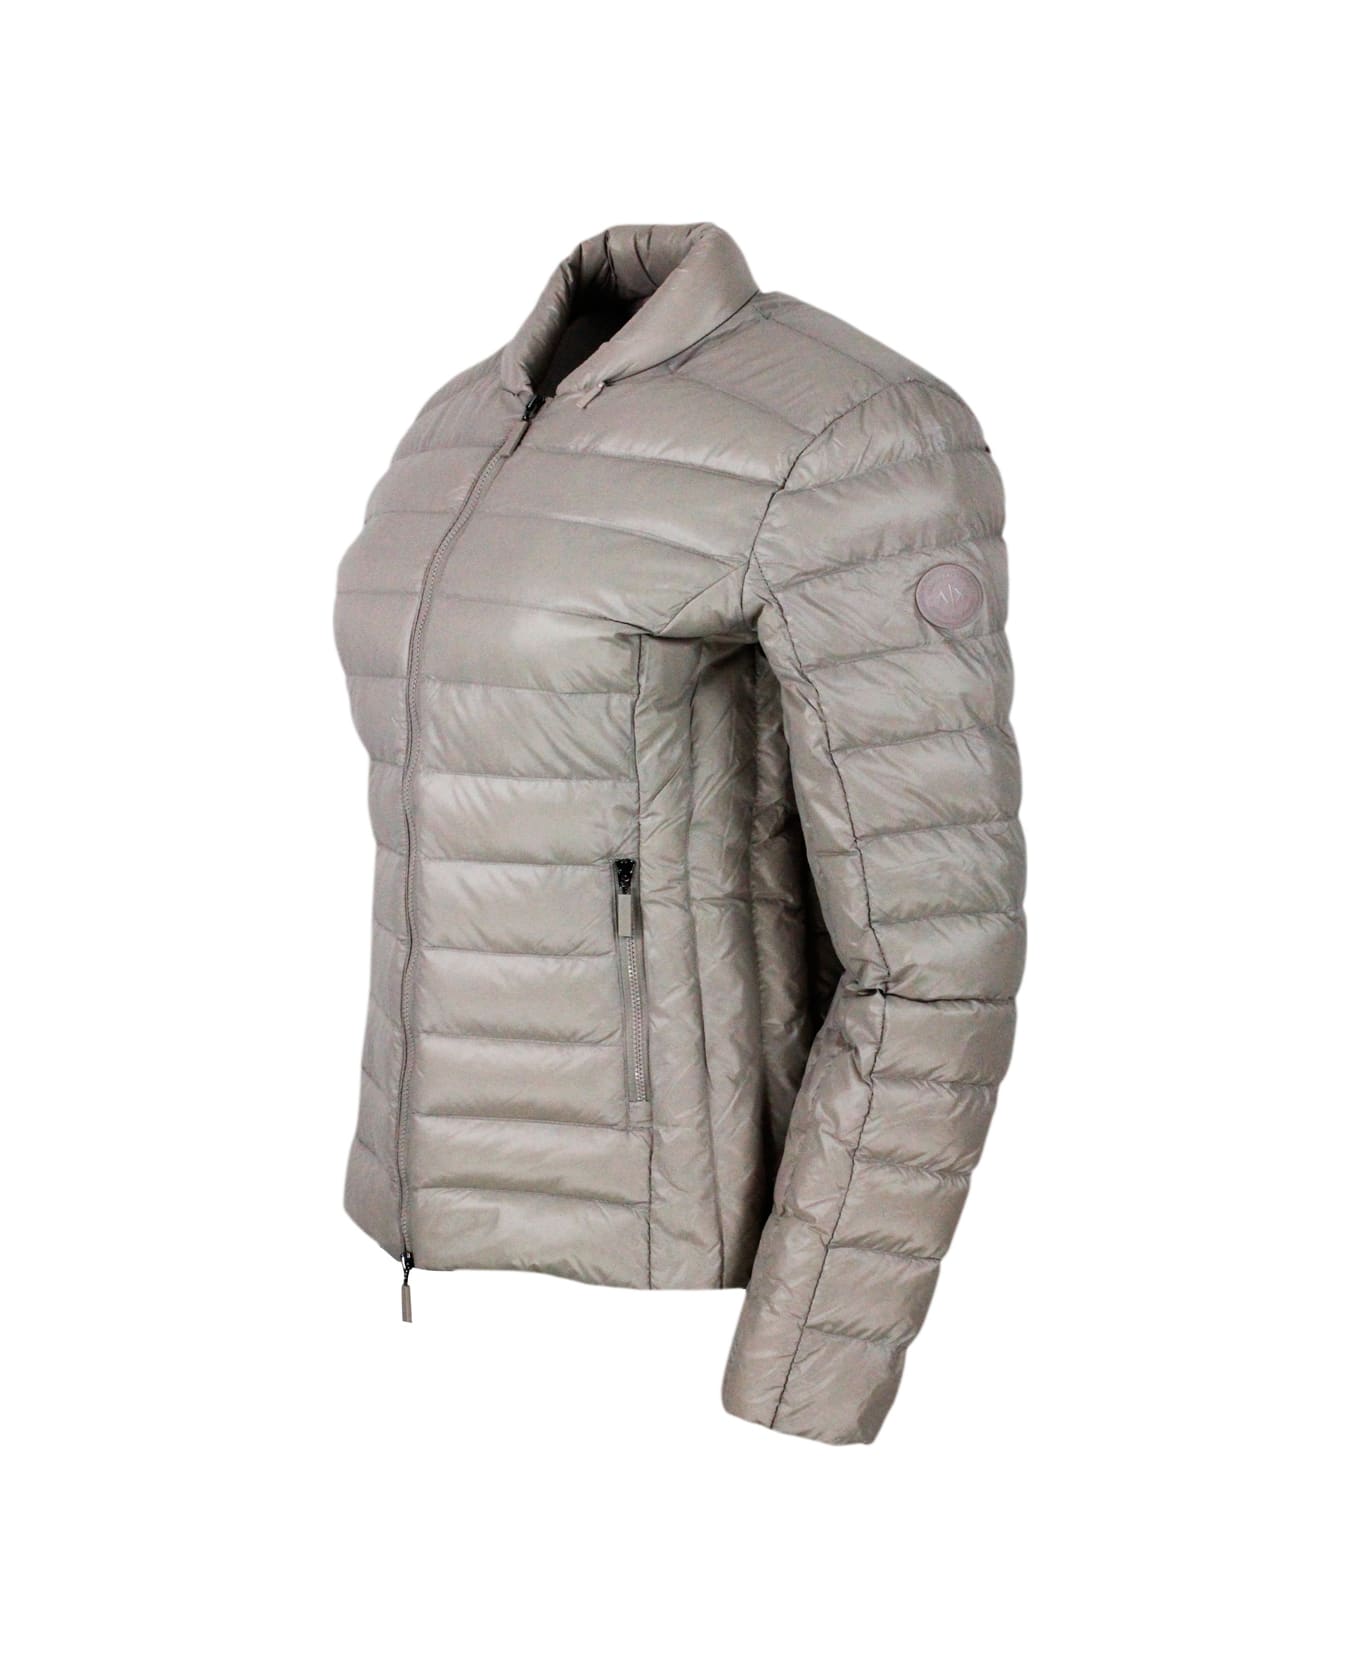 Armani Collezioni Lightweight 100 Gram Slim Down Jacket With Integrated Concealed Hood And Zip Closure - Beige